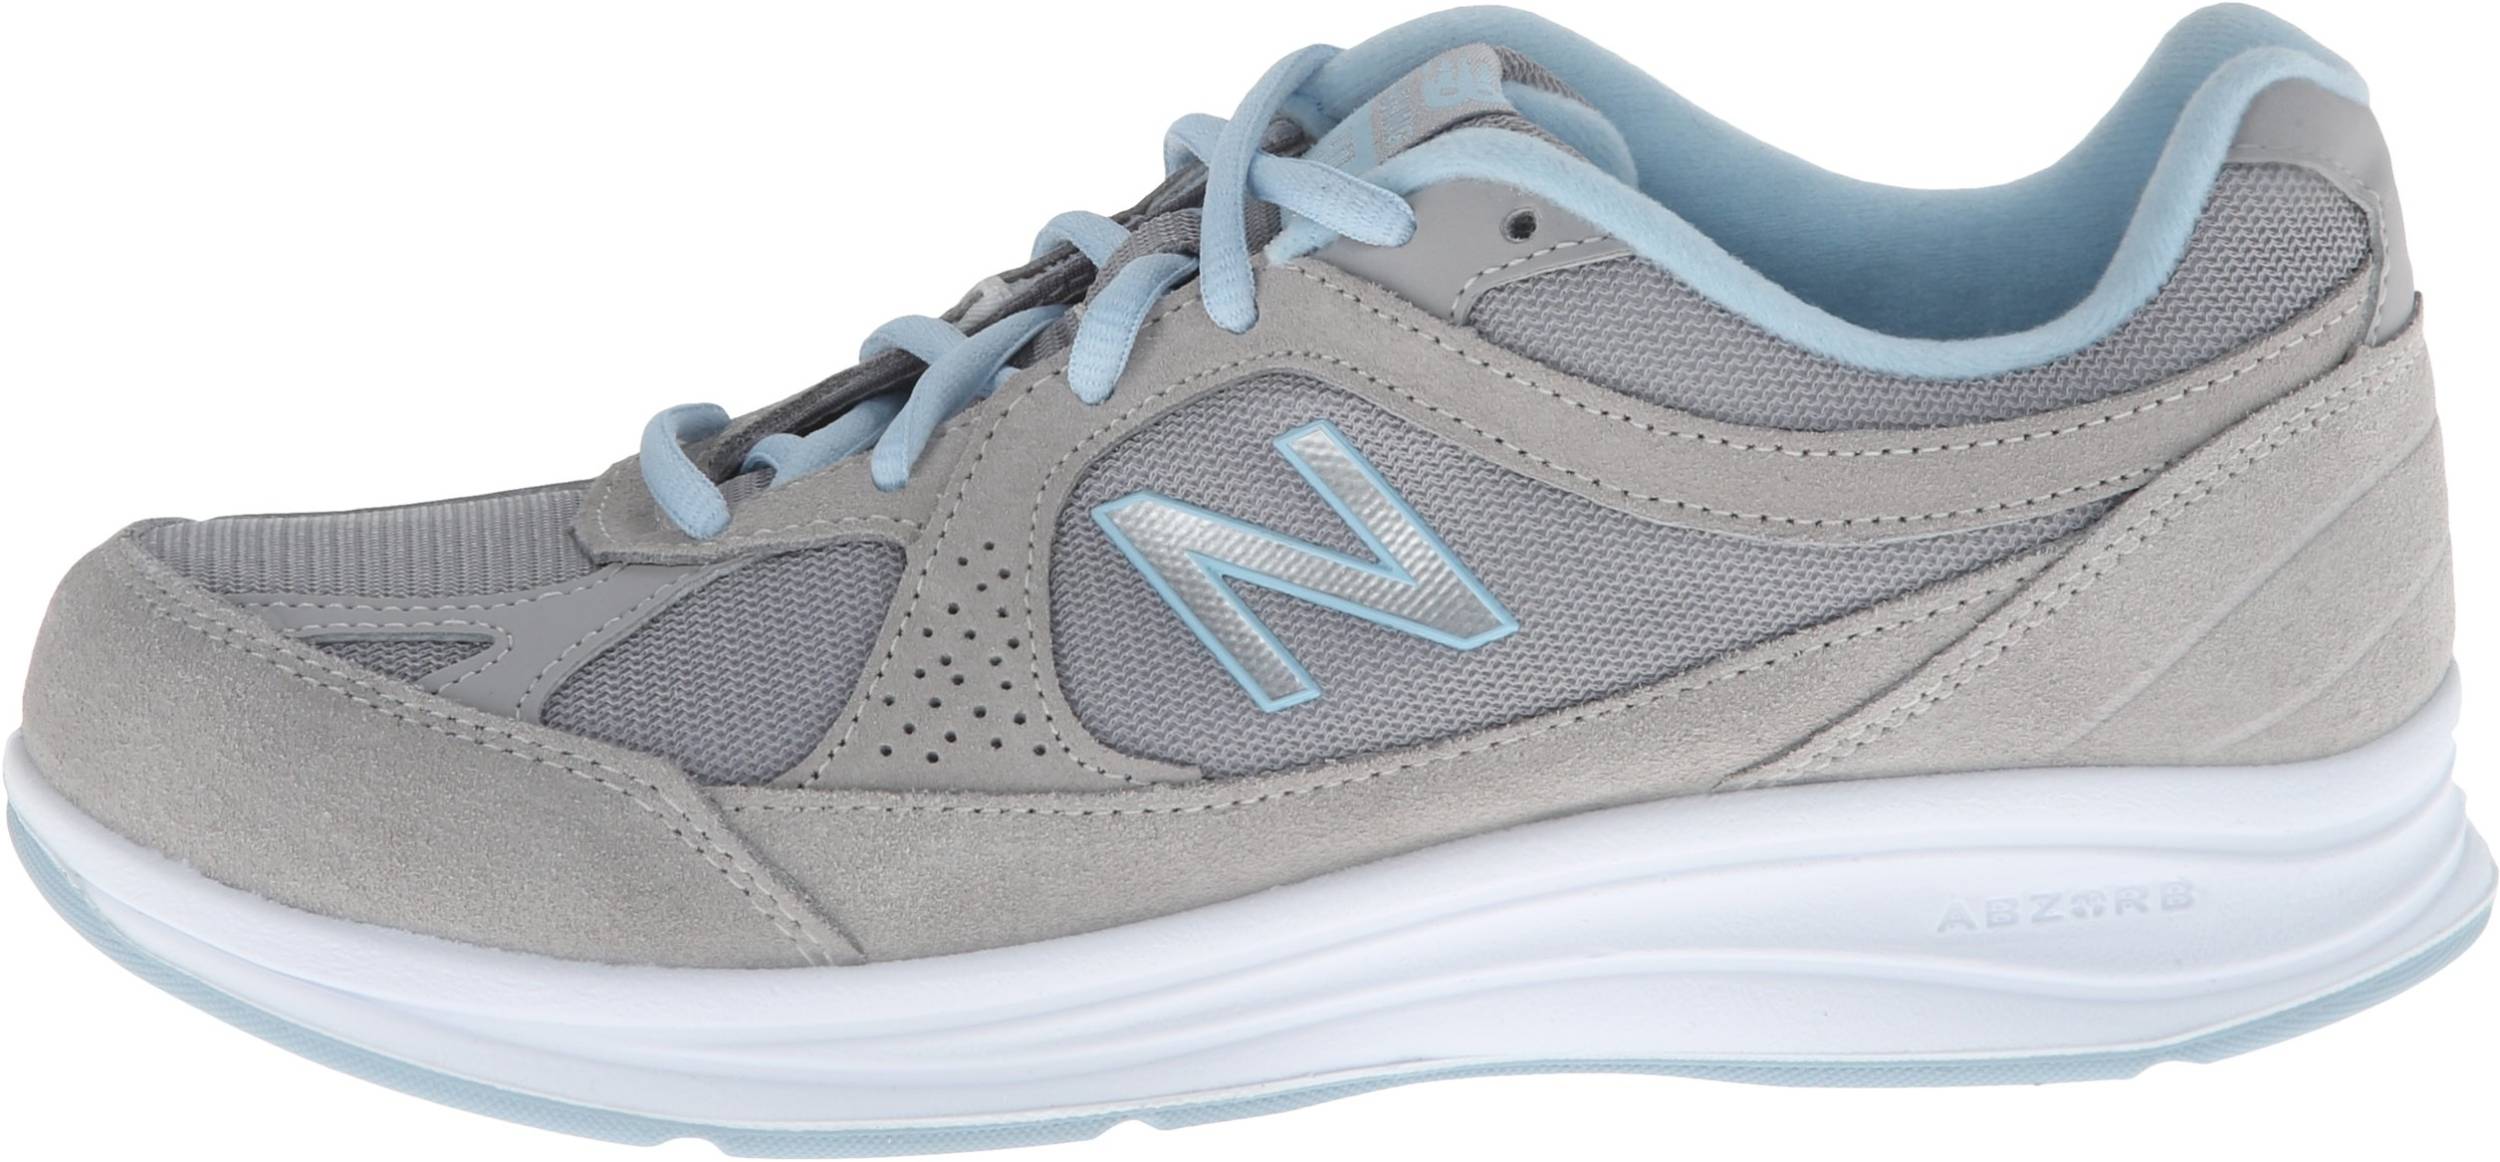 Only $85 + Review of New Balance 877 